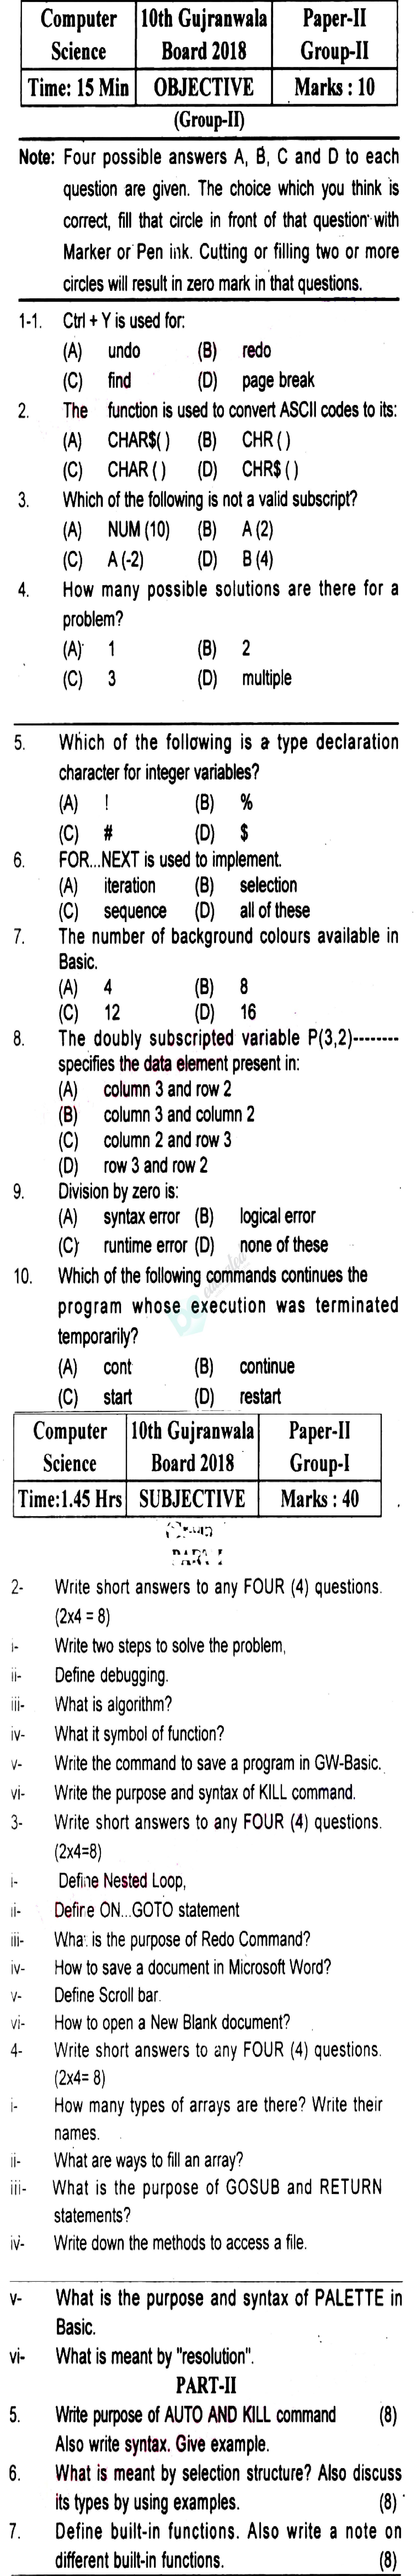 Computer Science 10th English Medium Past Paper Group 2 BISE Gujranwala 2018